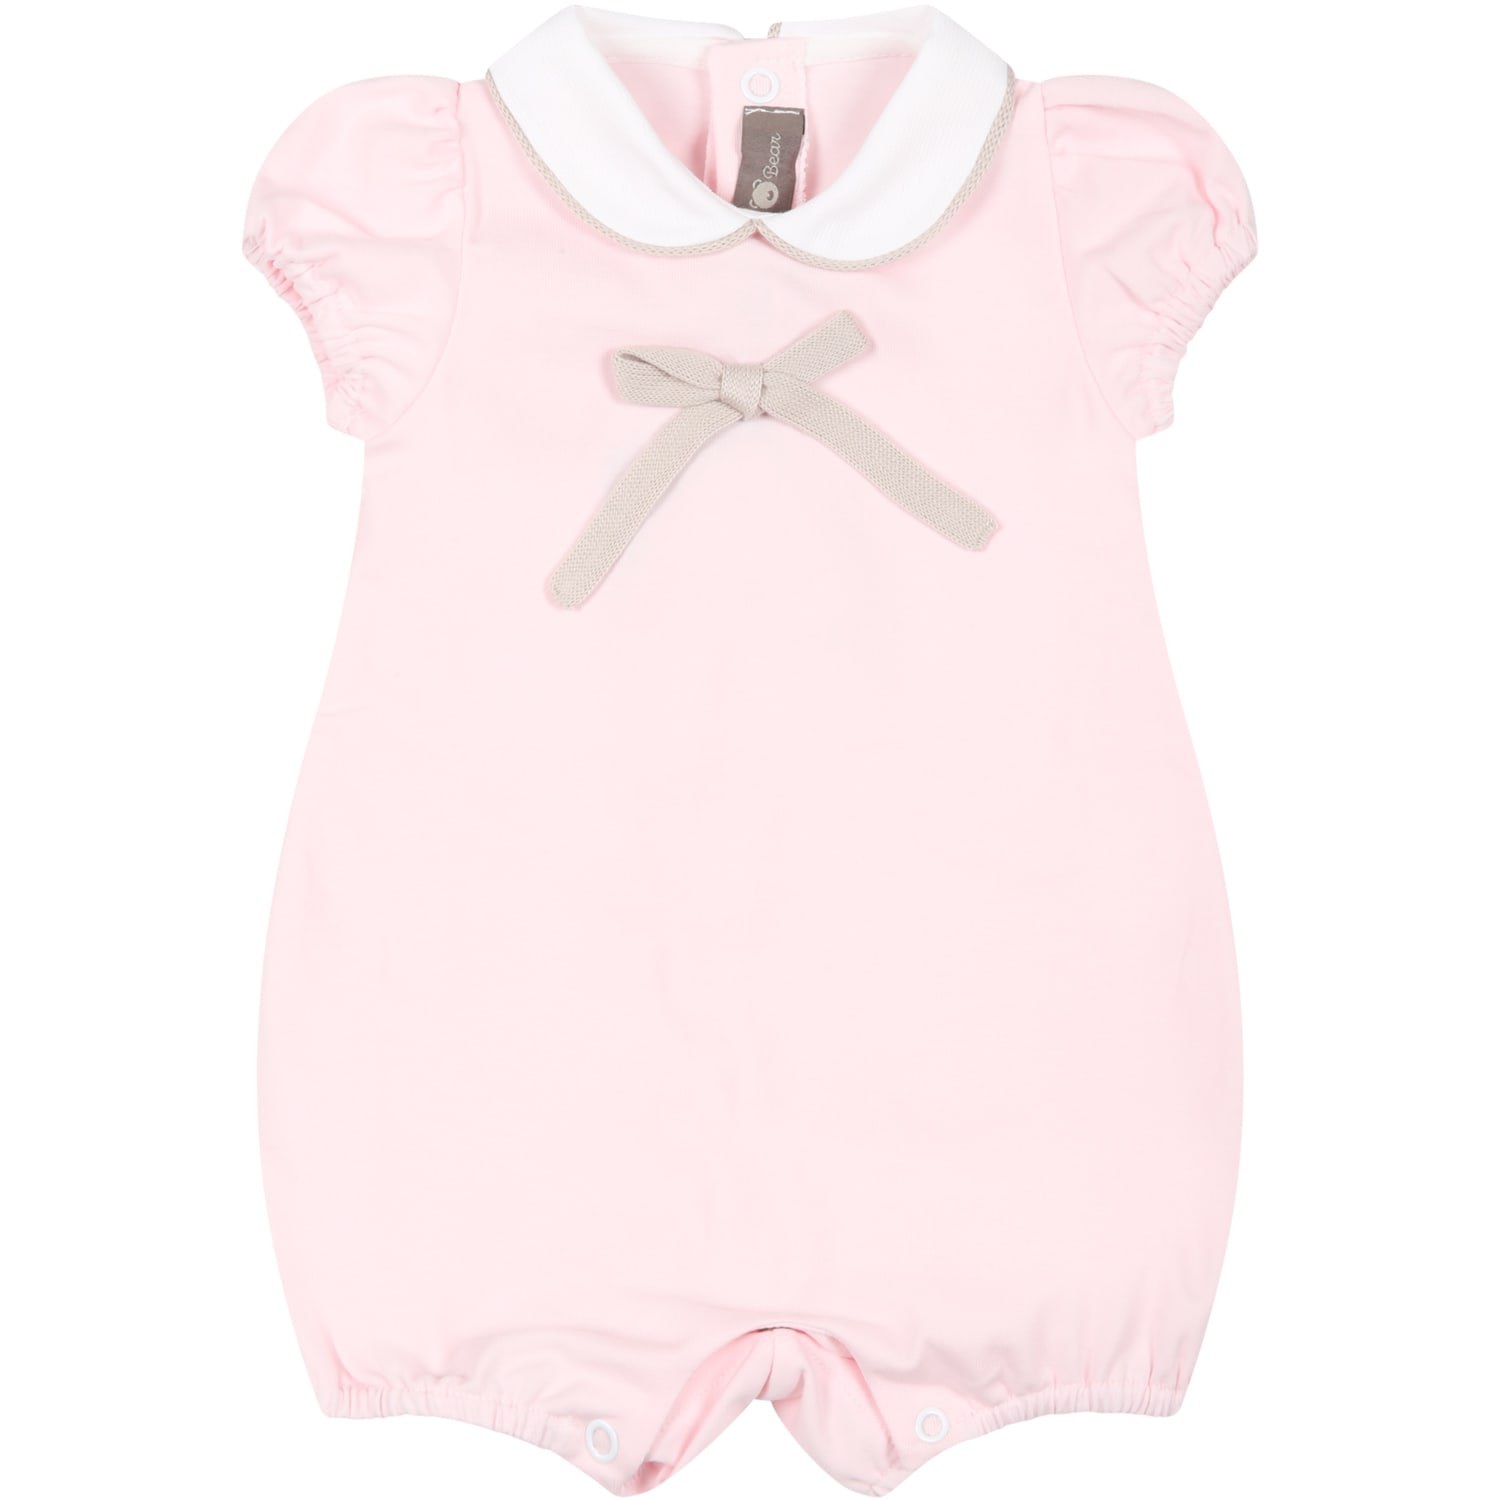 Little Bear Pink Romper For Baby Girl With Bow